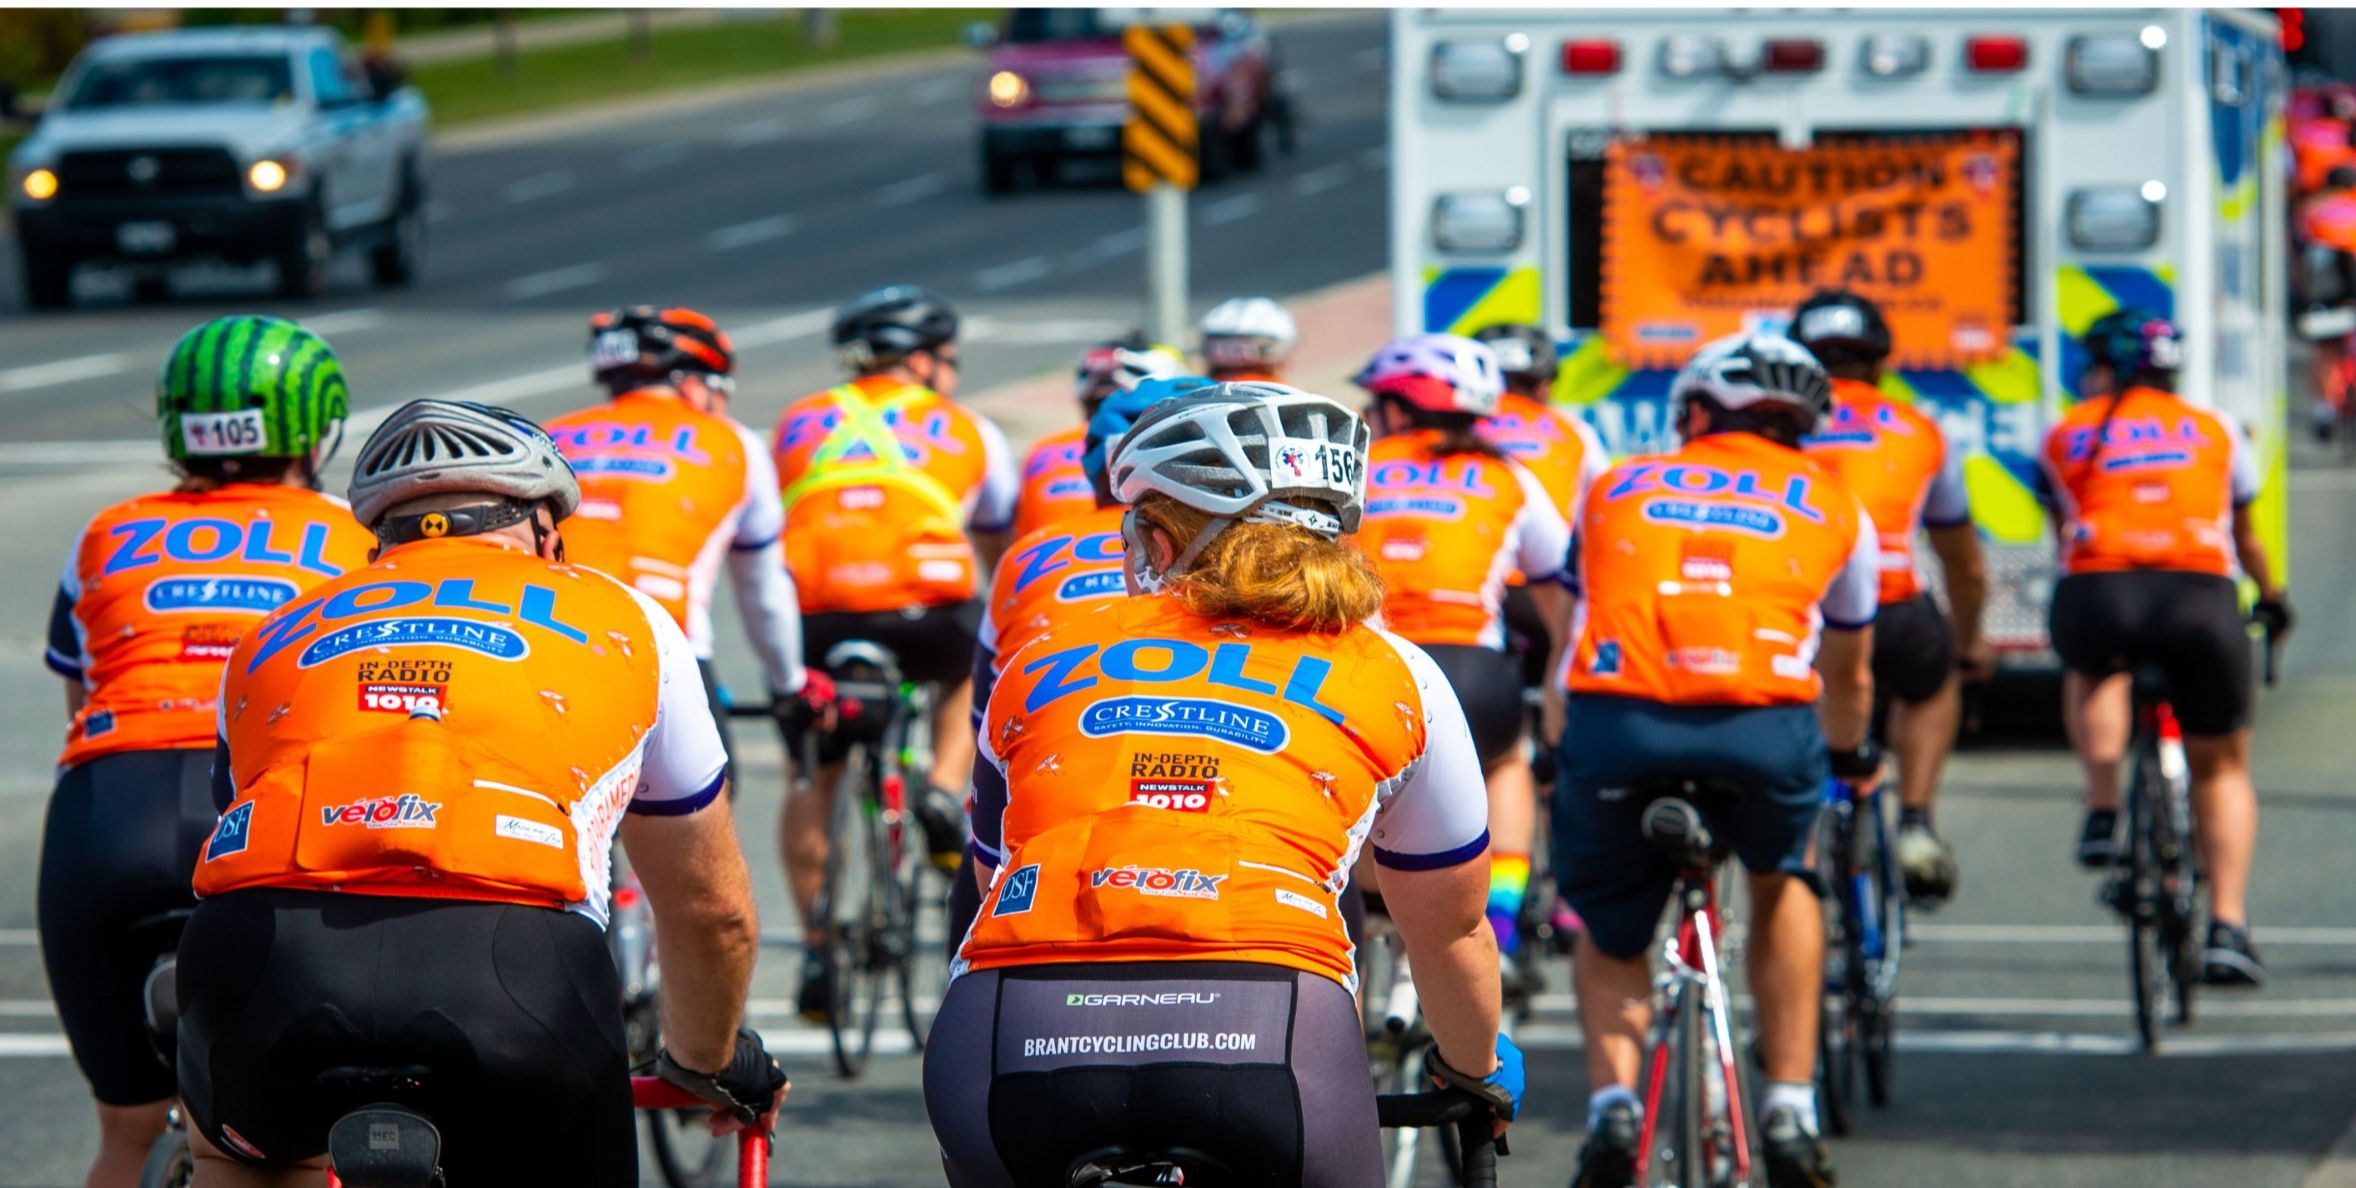 Would you like to sponsor the Tour Paramedic Ride?